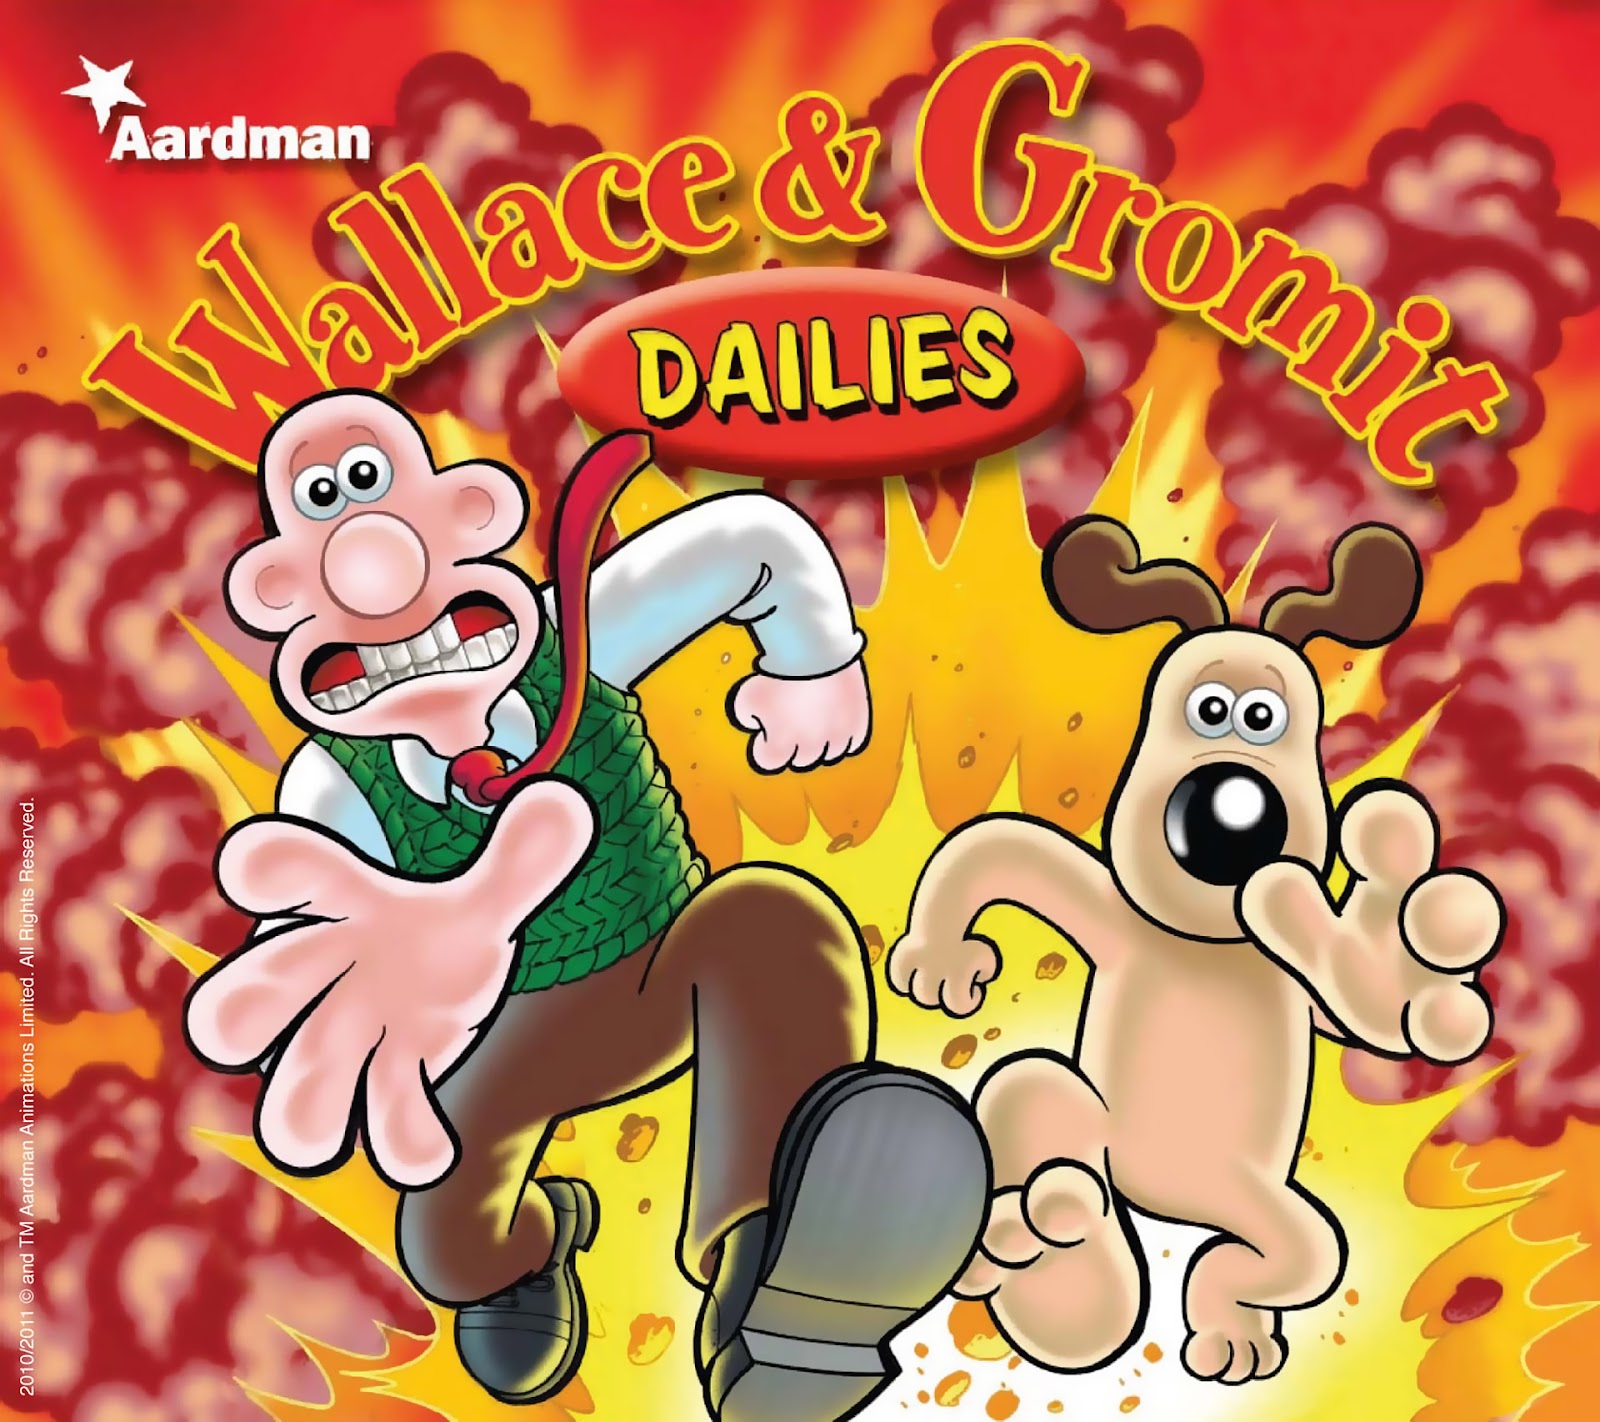 Wallace & Gromit Dailies issue 1 - Page 1